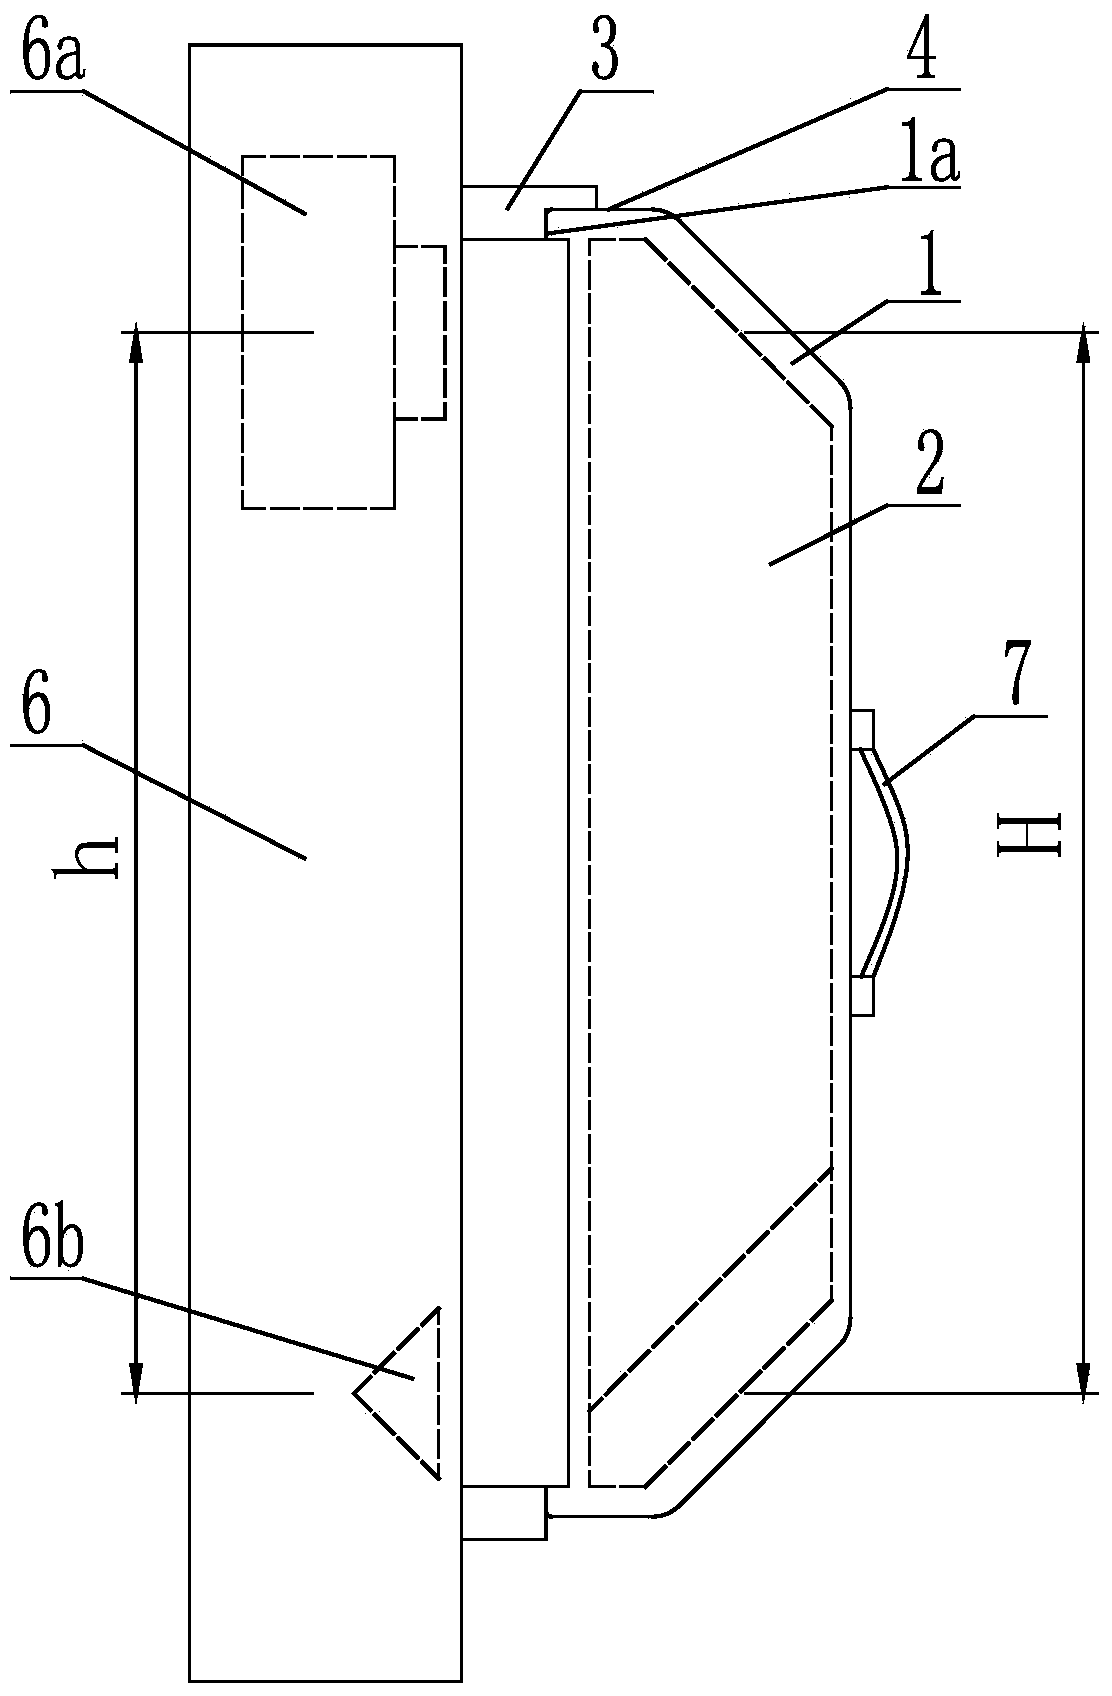 Collimator parallel optical axis orientation included angle calibration device